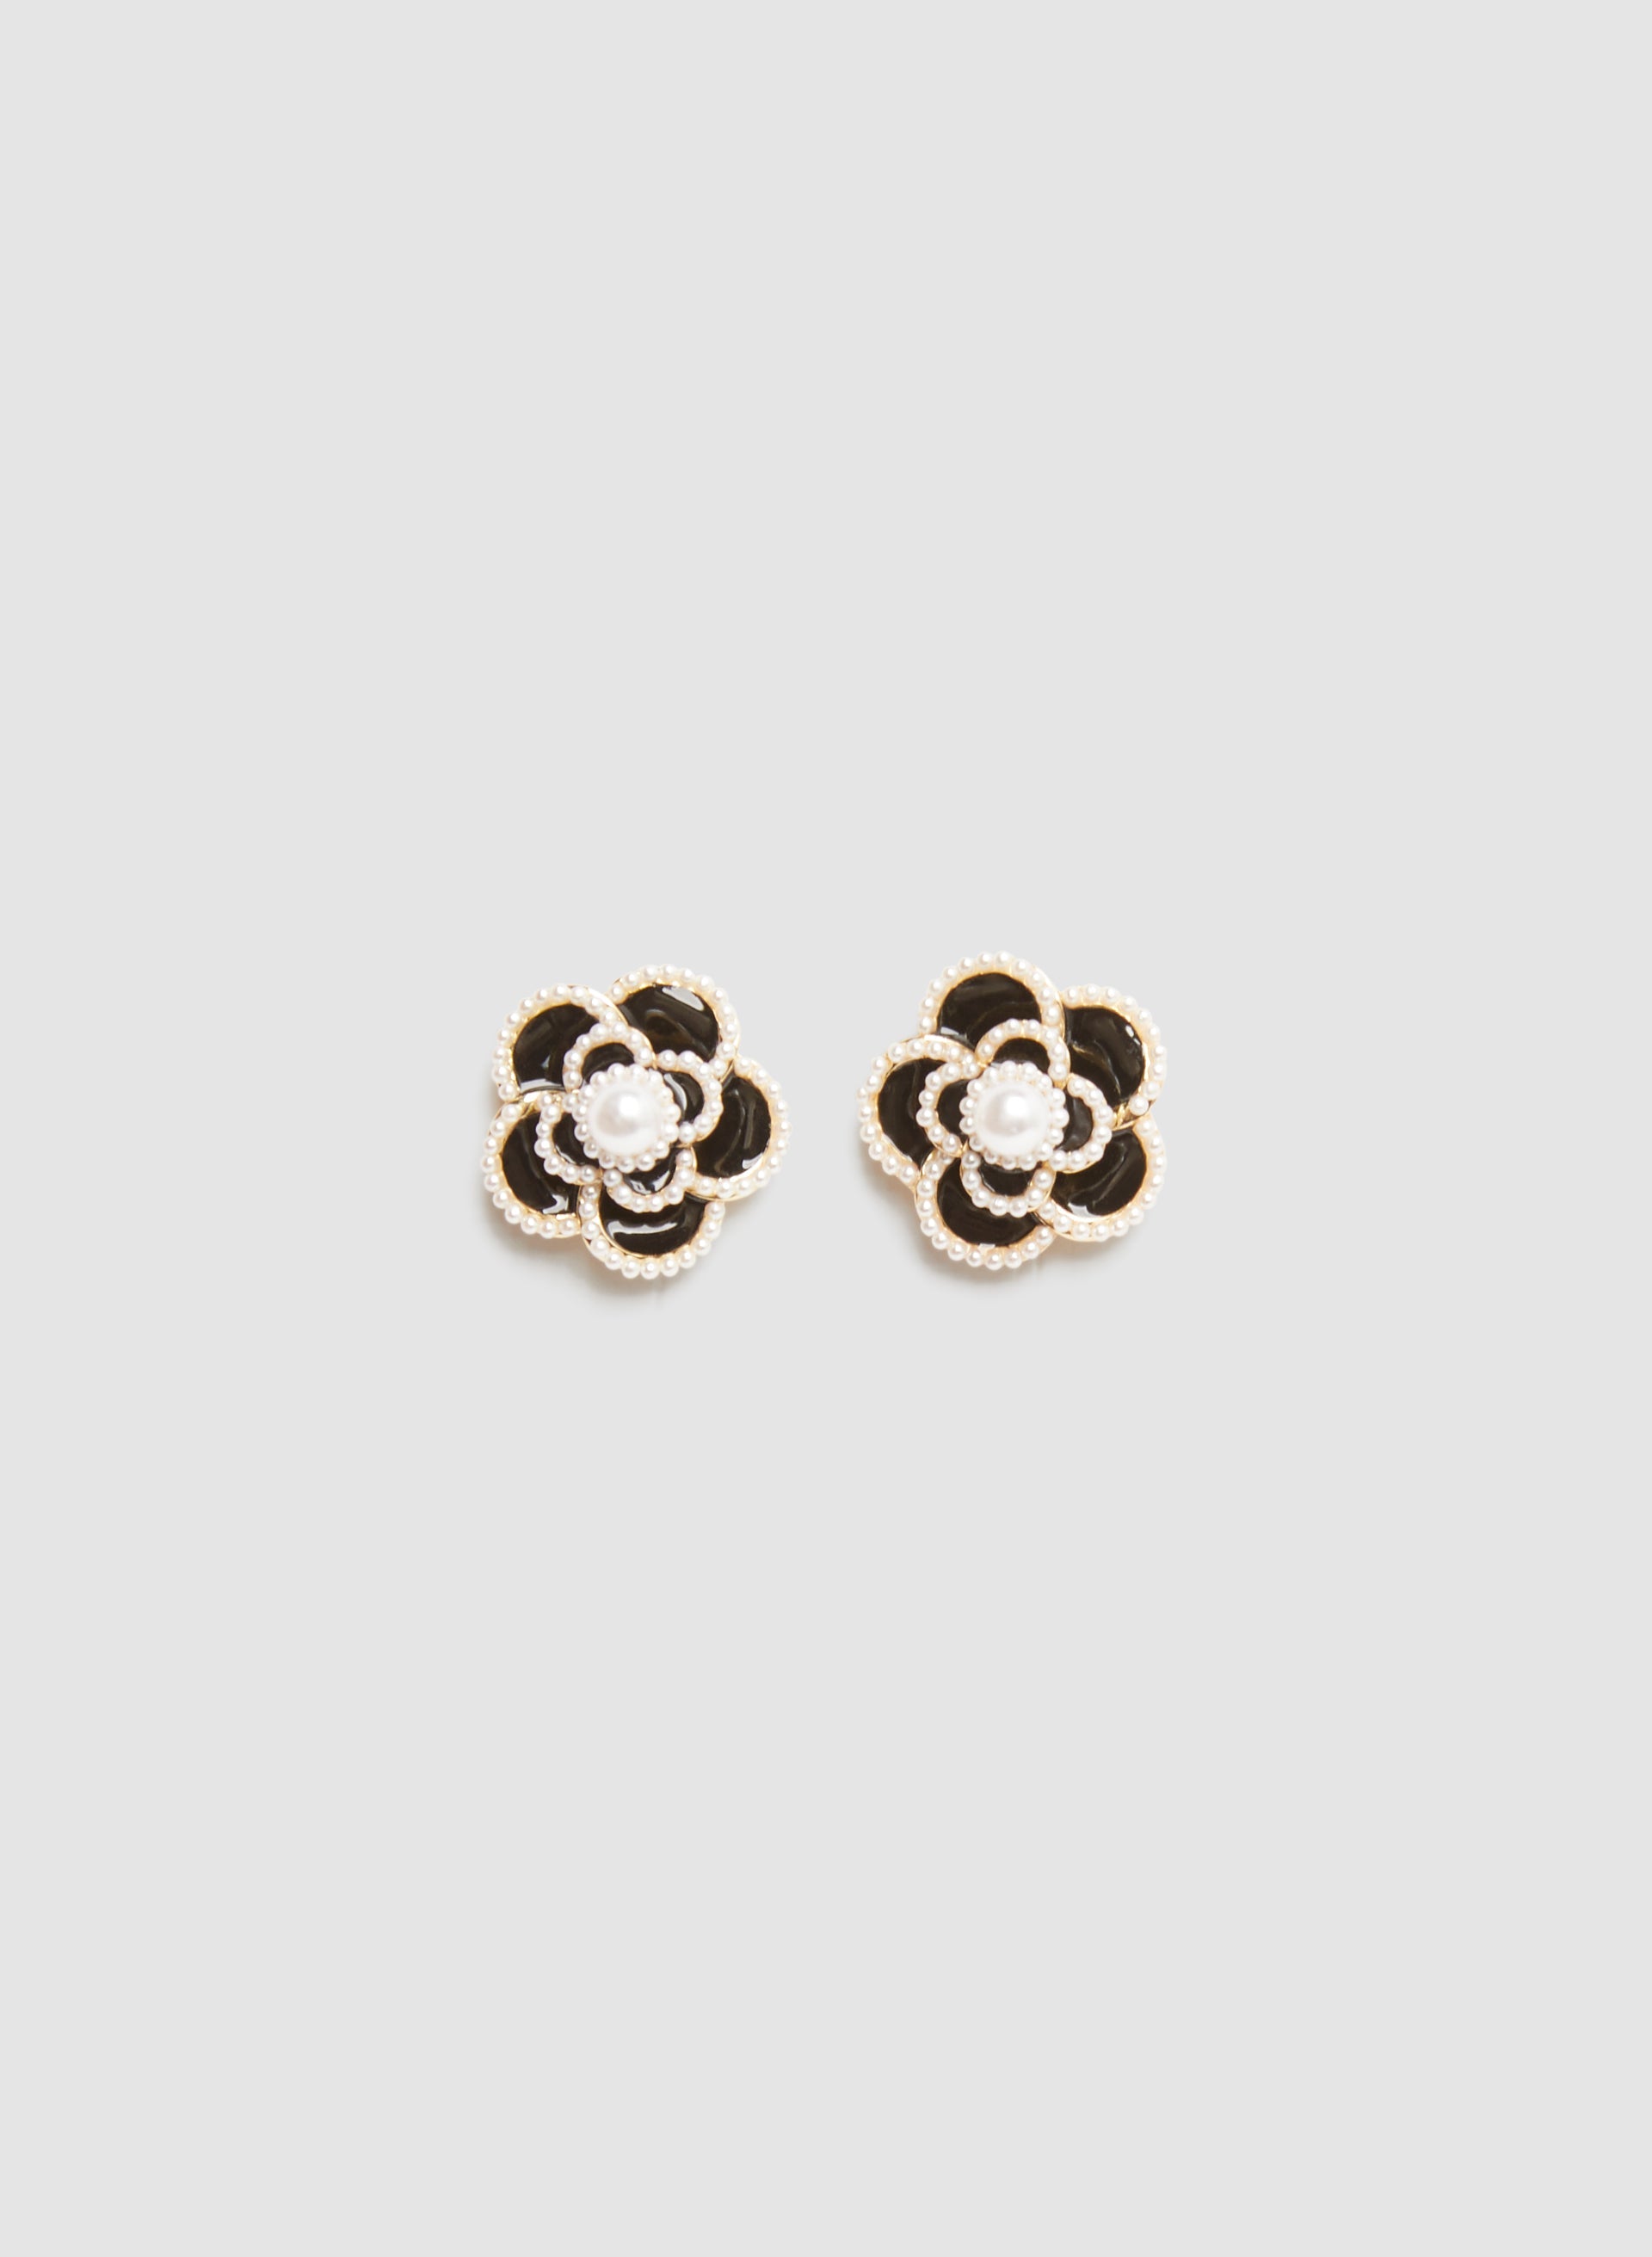 Floral Pearl Button Earrings